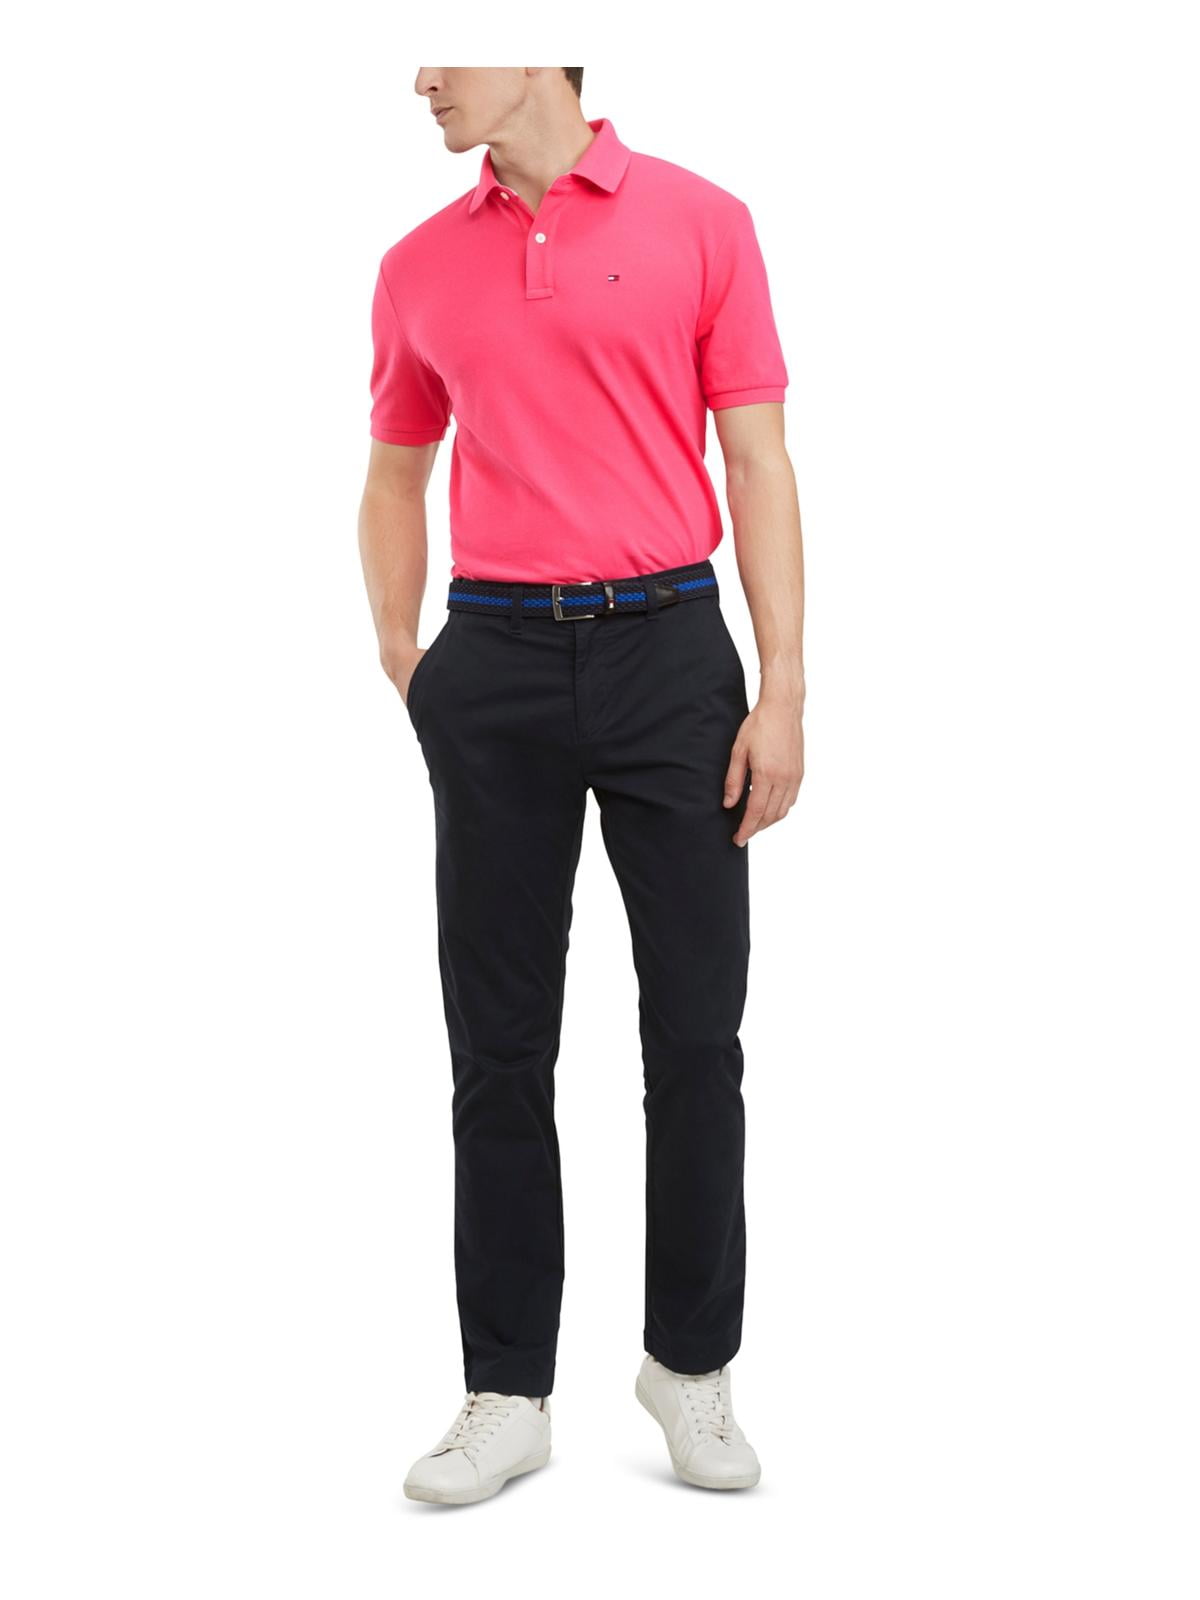 Tommy Hilfiger Mens Classic Fit Polo 